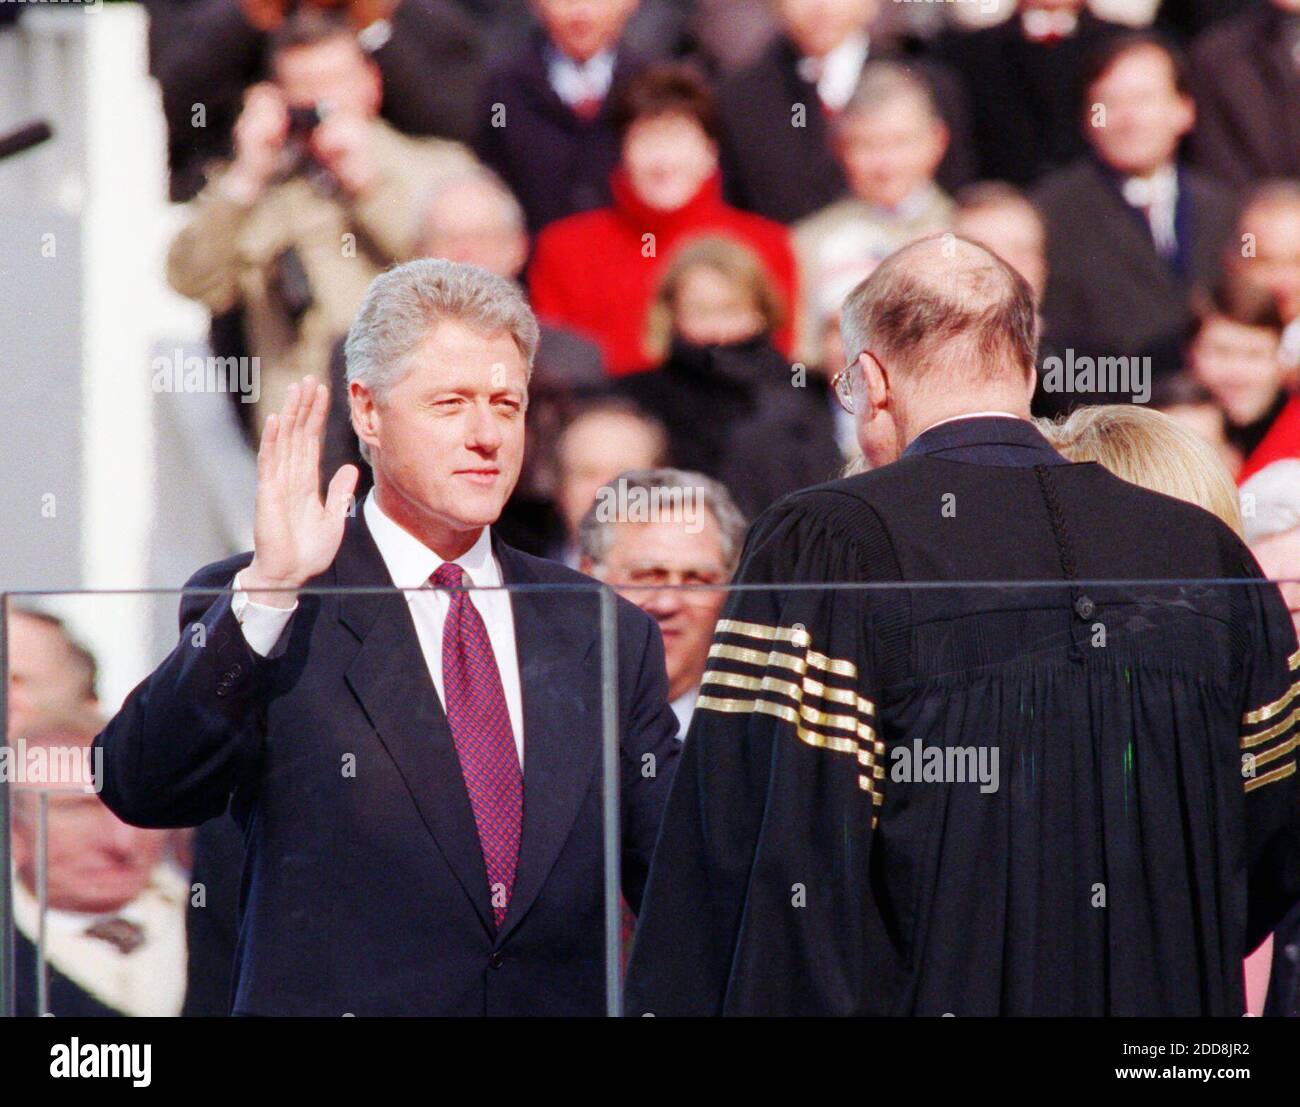 NO FILM, NO VIDEO, NO TV, NO DOCUMENTARY - William Jefferson Clinton is sworn in on the steps of the Capitol in Washington, DC, USA on Monday, January 20, 1997. Supreme Court Chief Justice William Rehnquist administers the oath of office for Clinton's second term. Photo by Peter Tobia/Philadelphia Inquirer/MCT/ABACAPRESS.COM Stock Photo